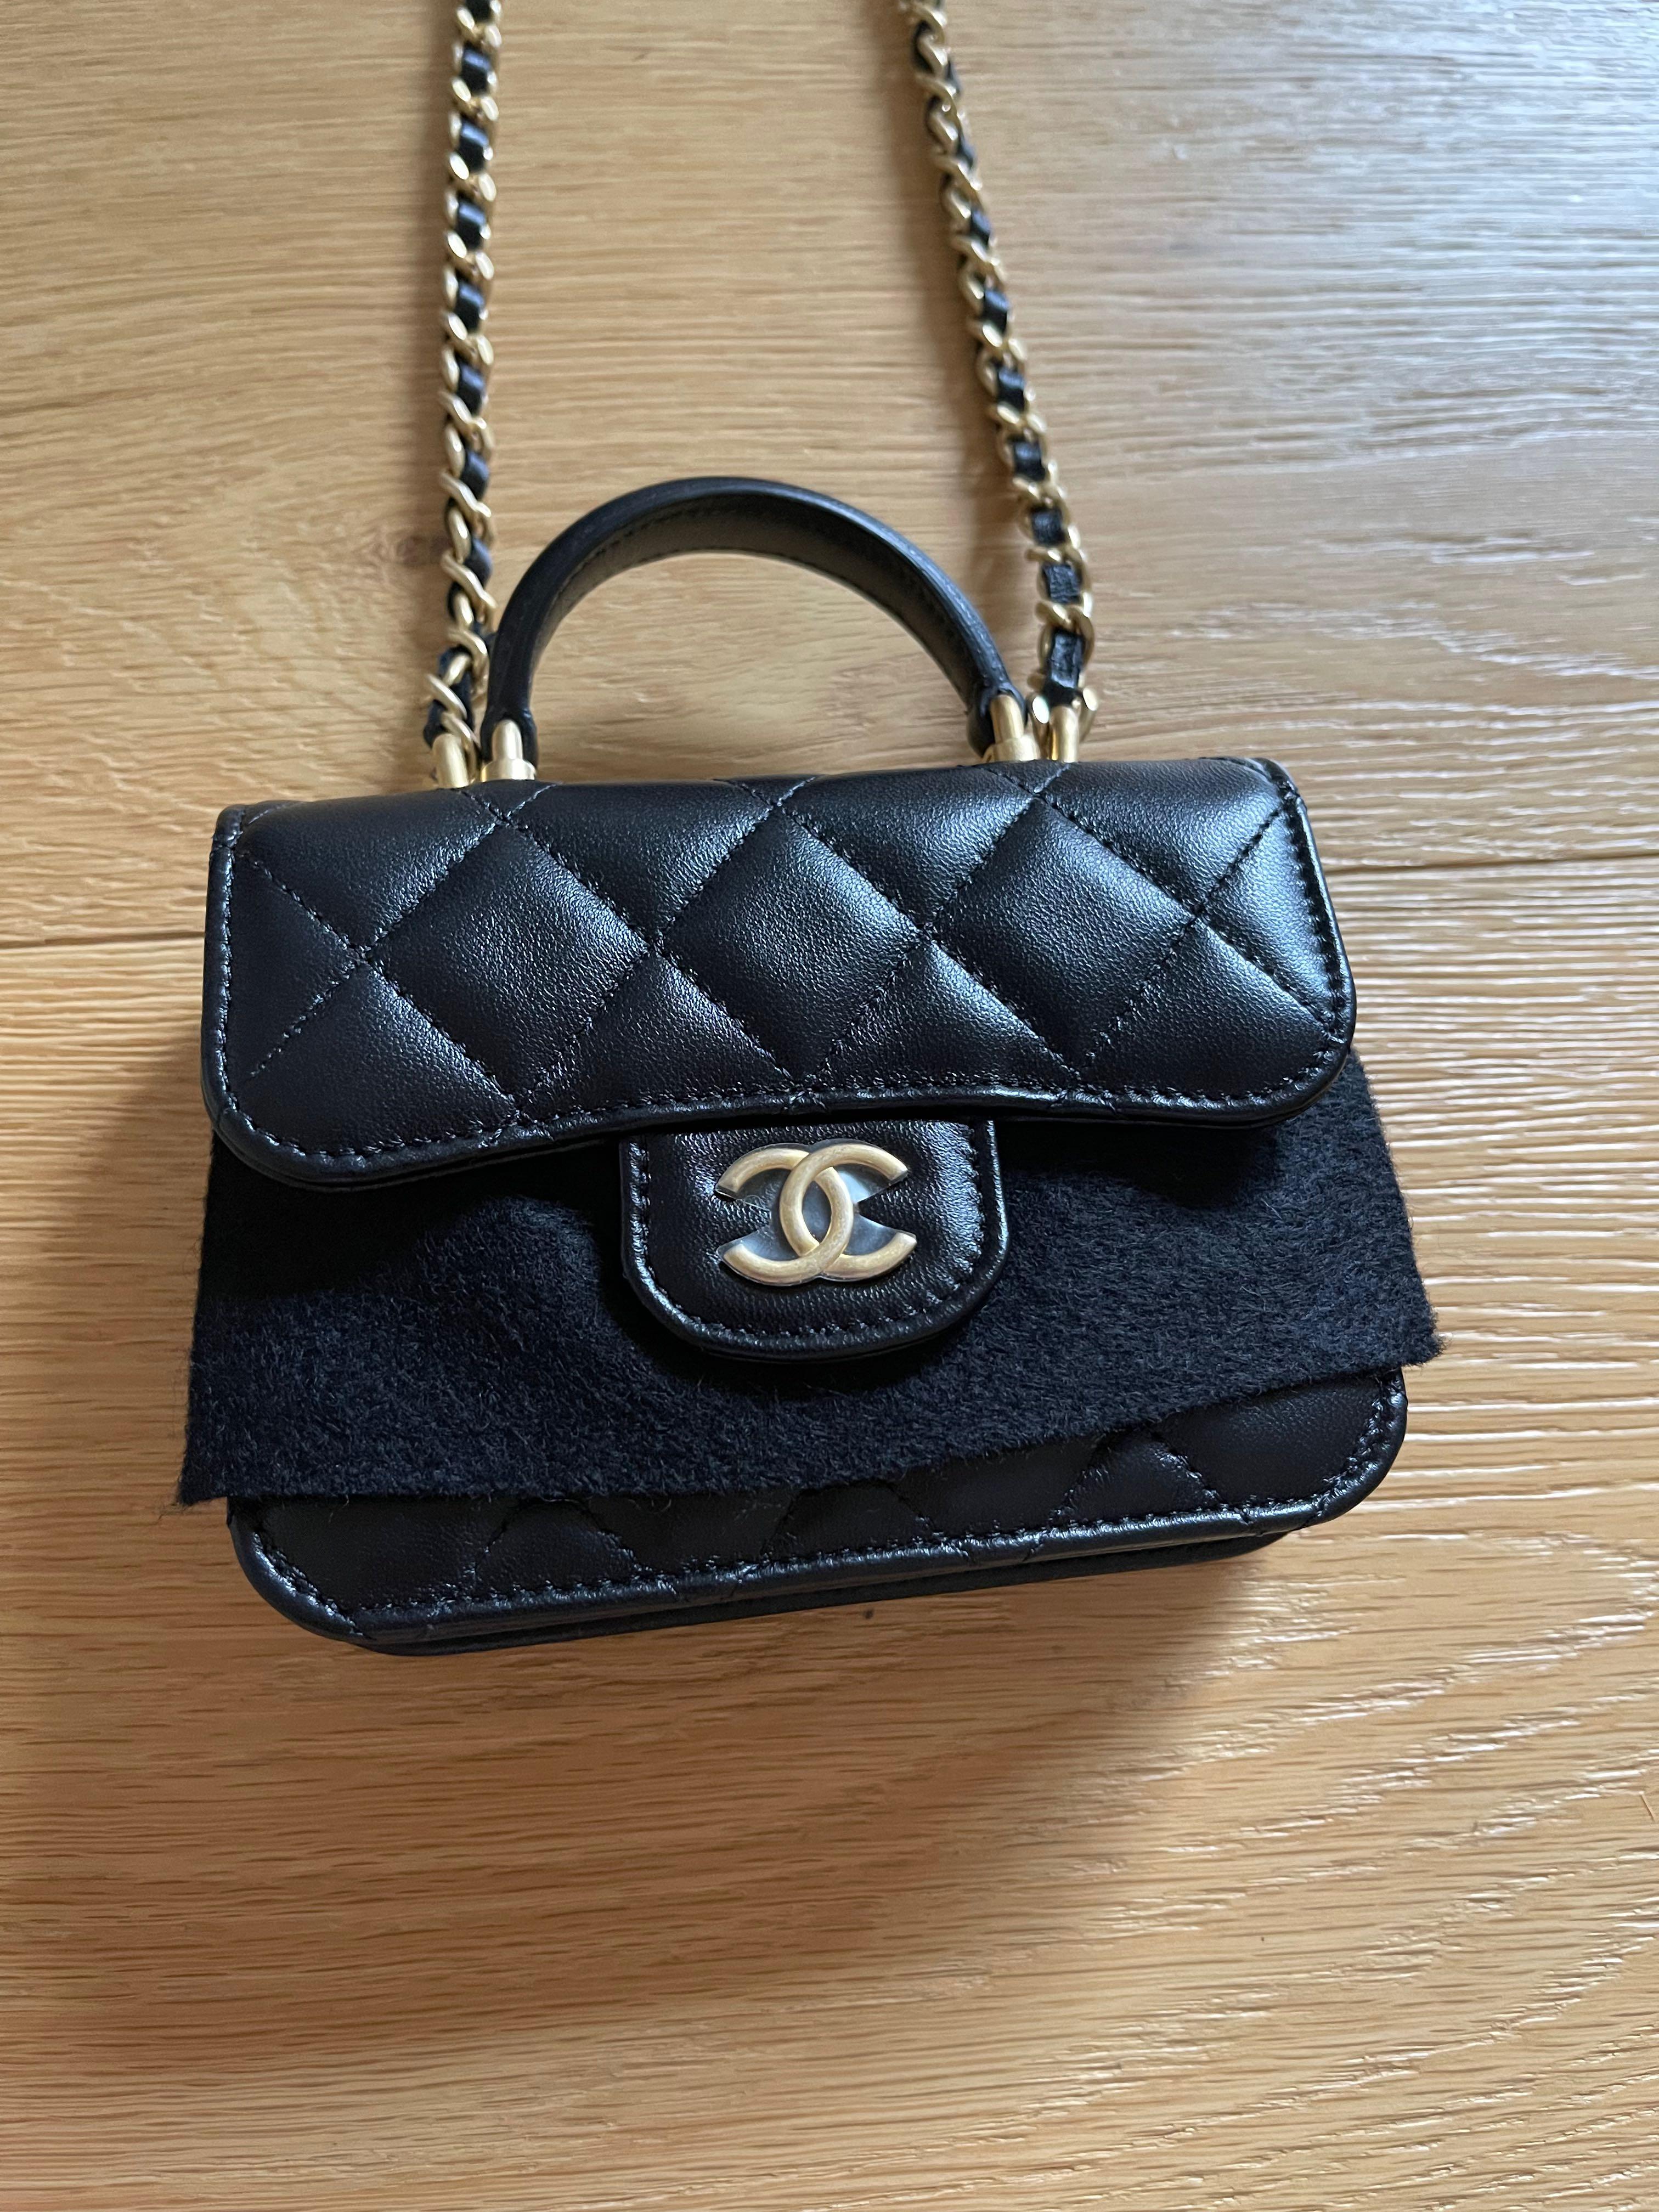 HELP! New Chanel Classic but chain looks funny?